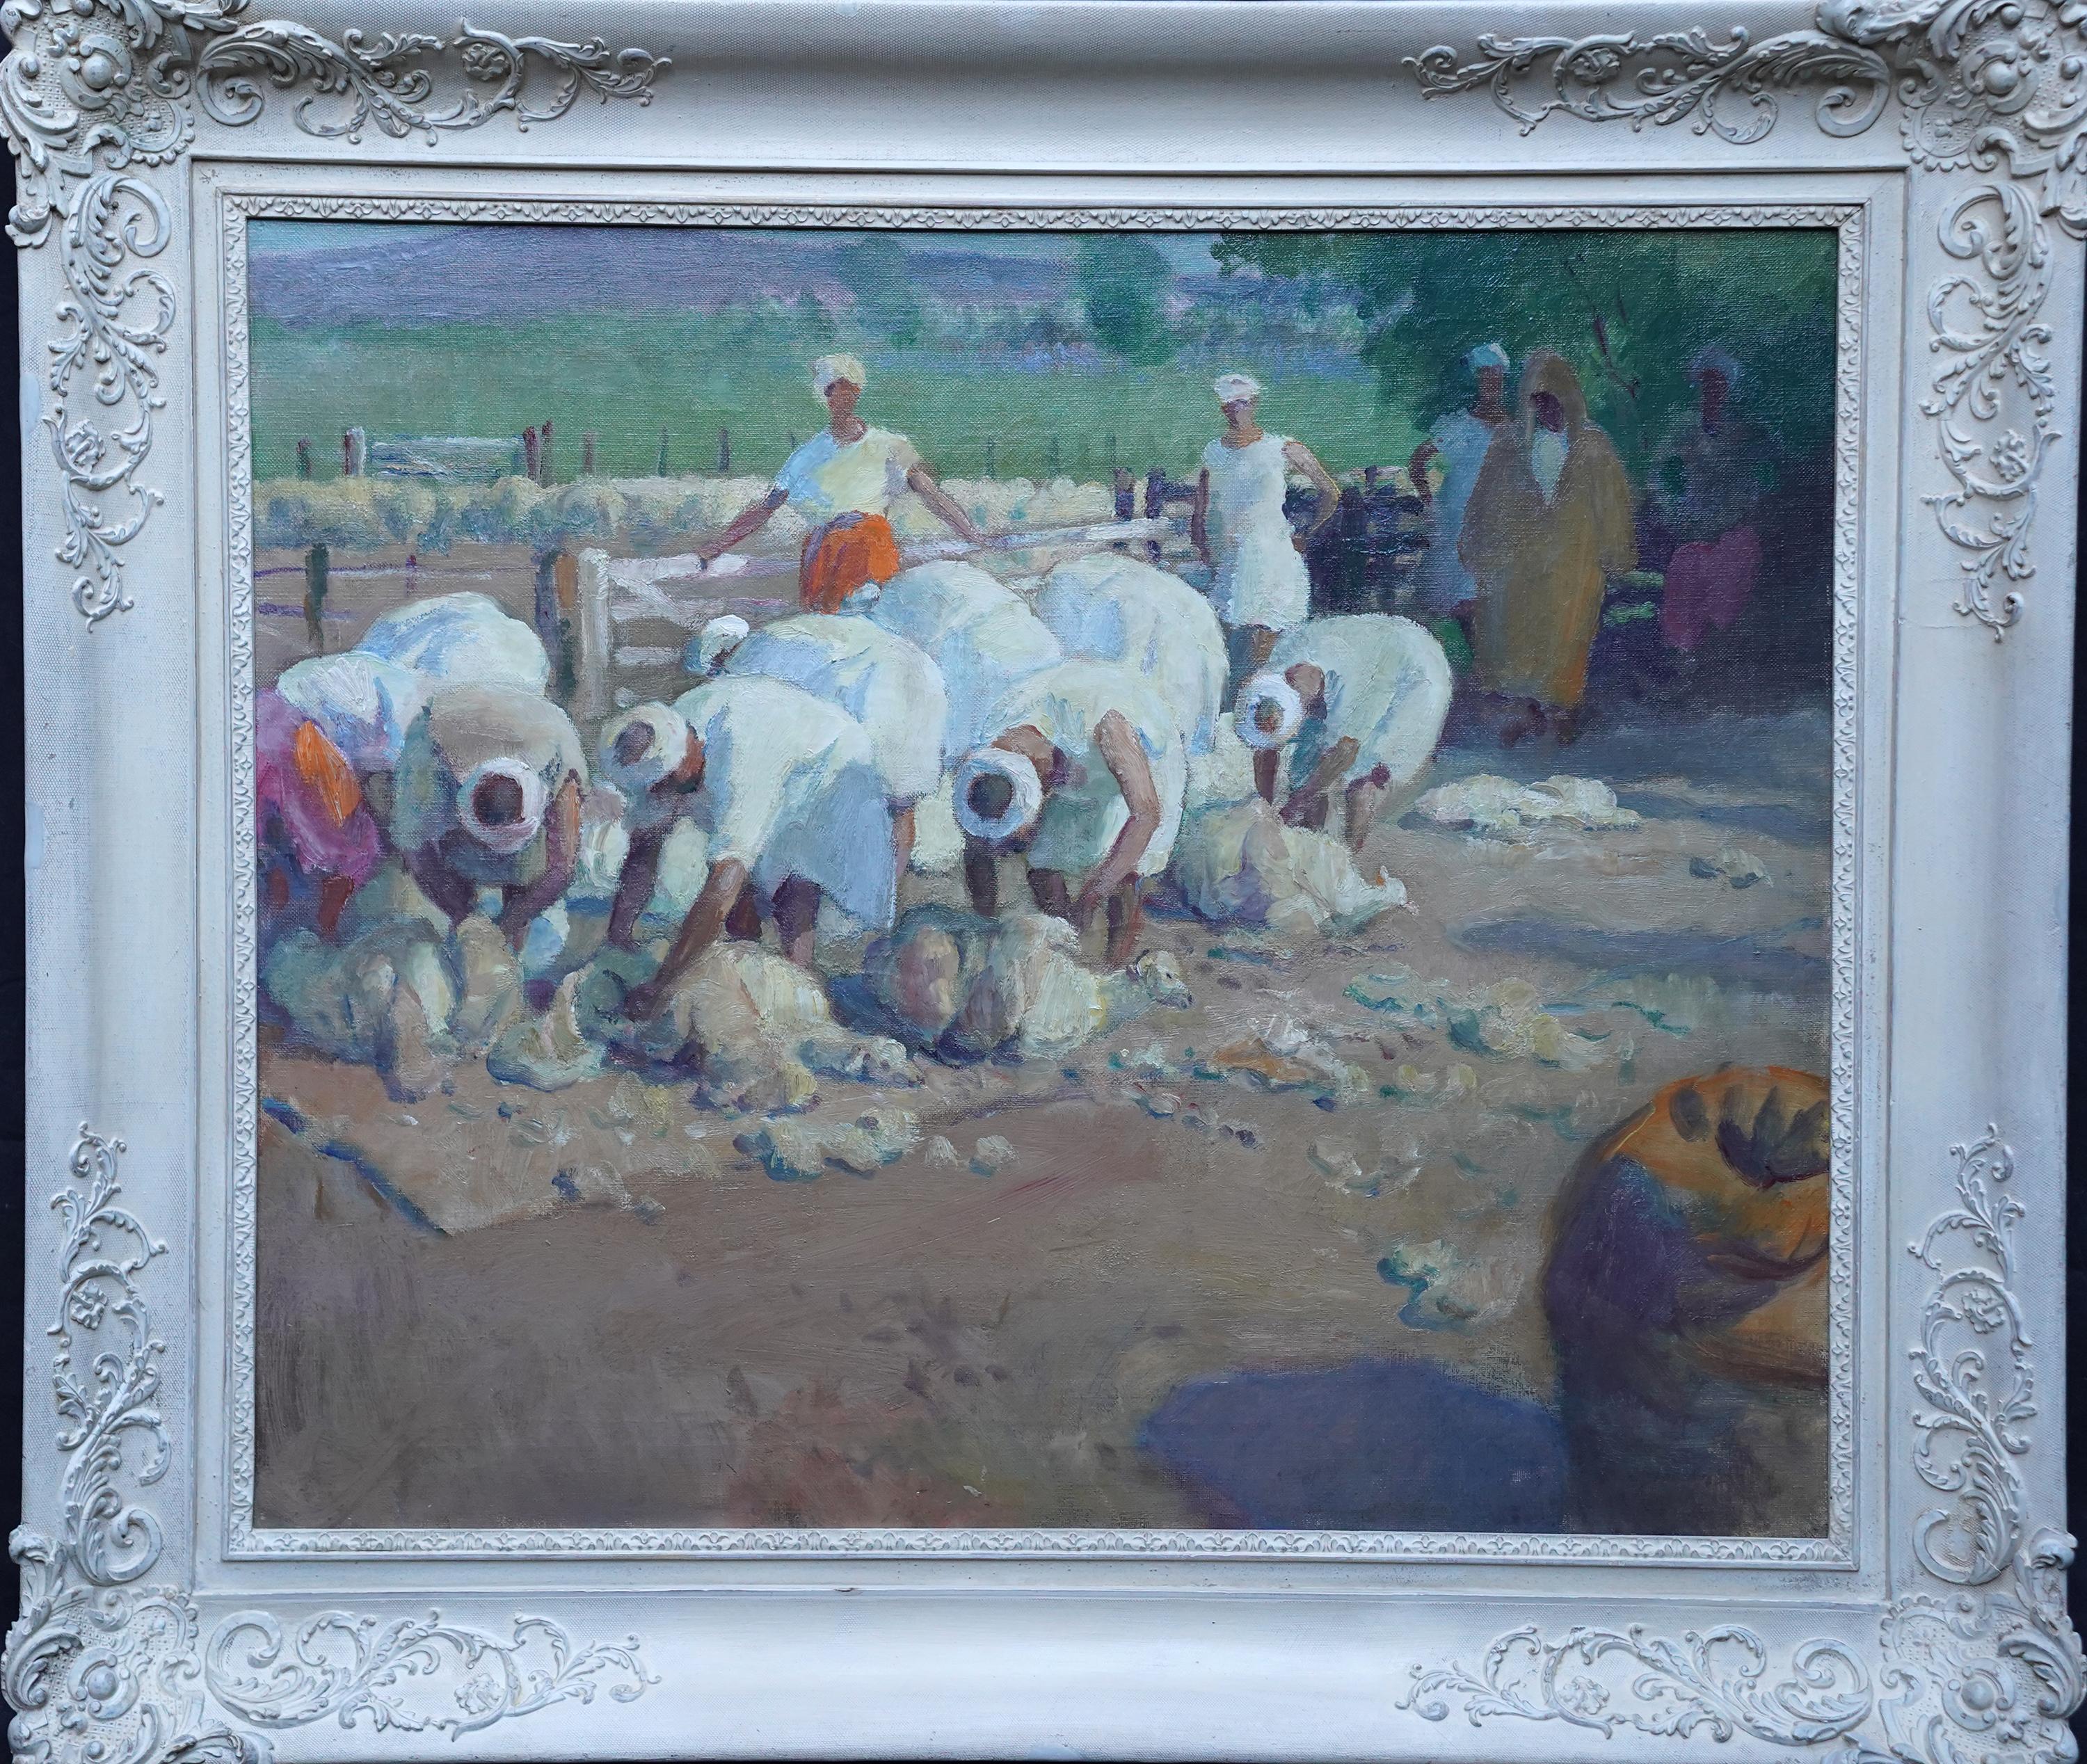 Spencer Pryse Animal Painting - Sheep Shearers, Tangiers - British 1920's Orientalist figurative oil painting